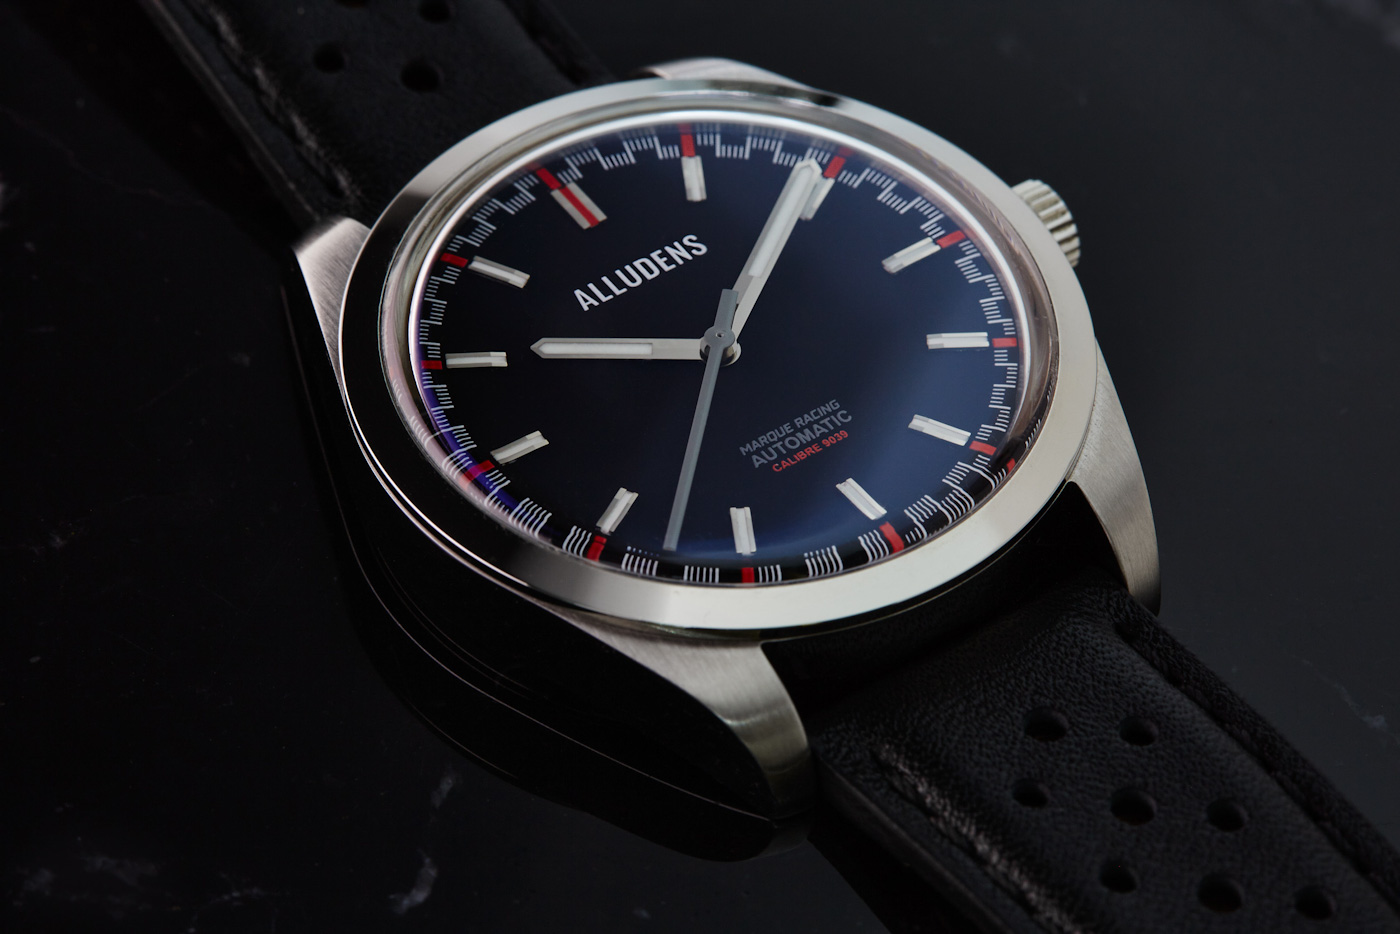 Alludens Blends Dressy Style With A Racing Spirit With New Marque Racing Watch